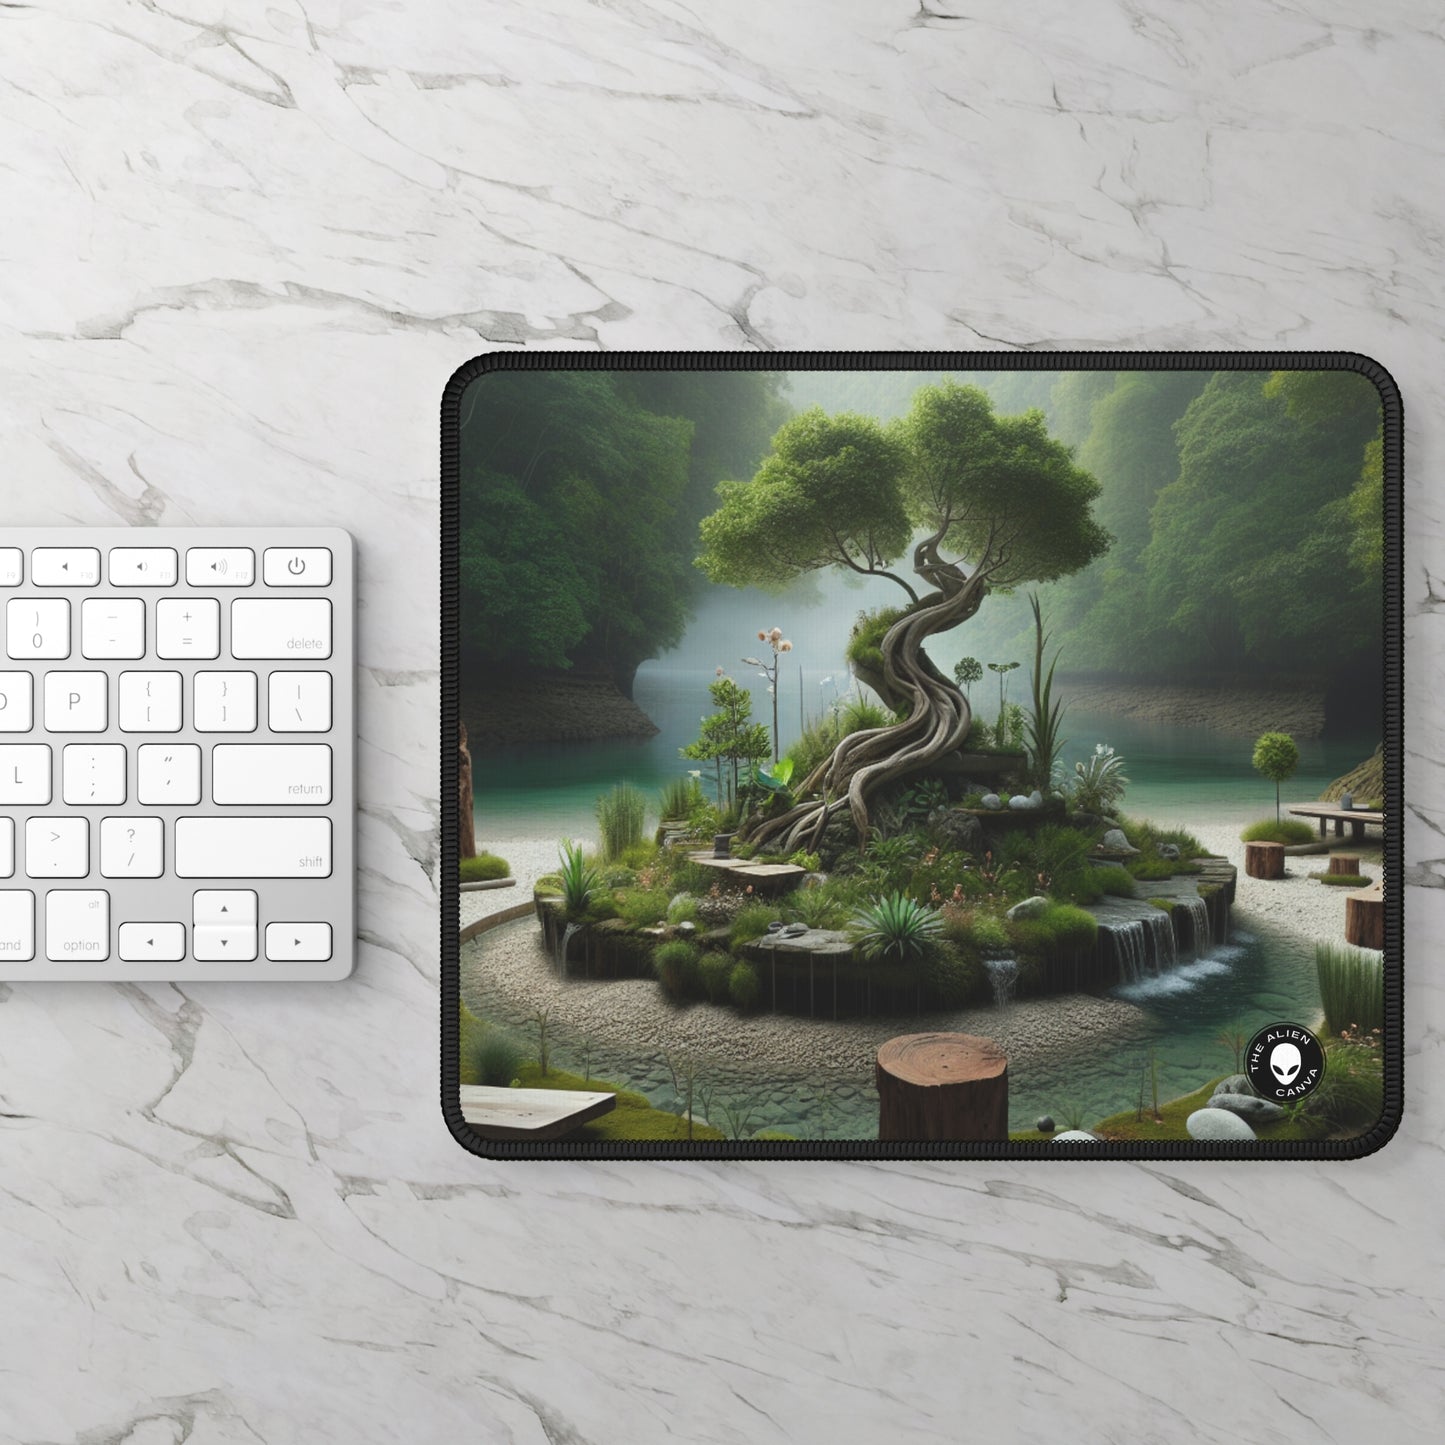 "Renewal Recycled: An Interactive Environmental Sculpture" - The Alien Gaming Mouse Pad Environmental Sculpture